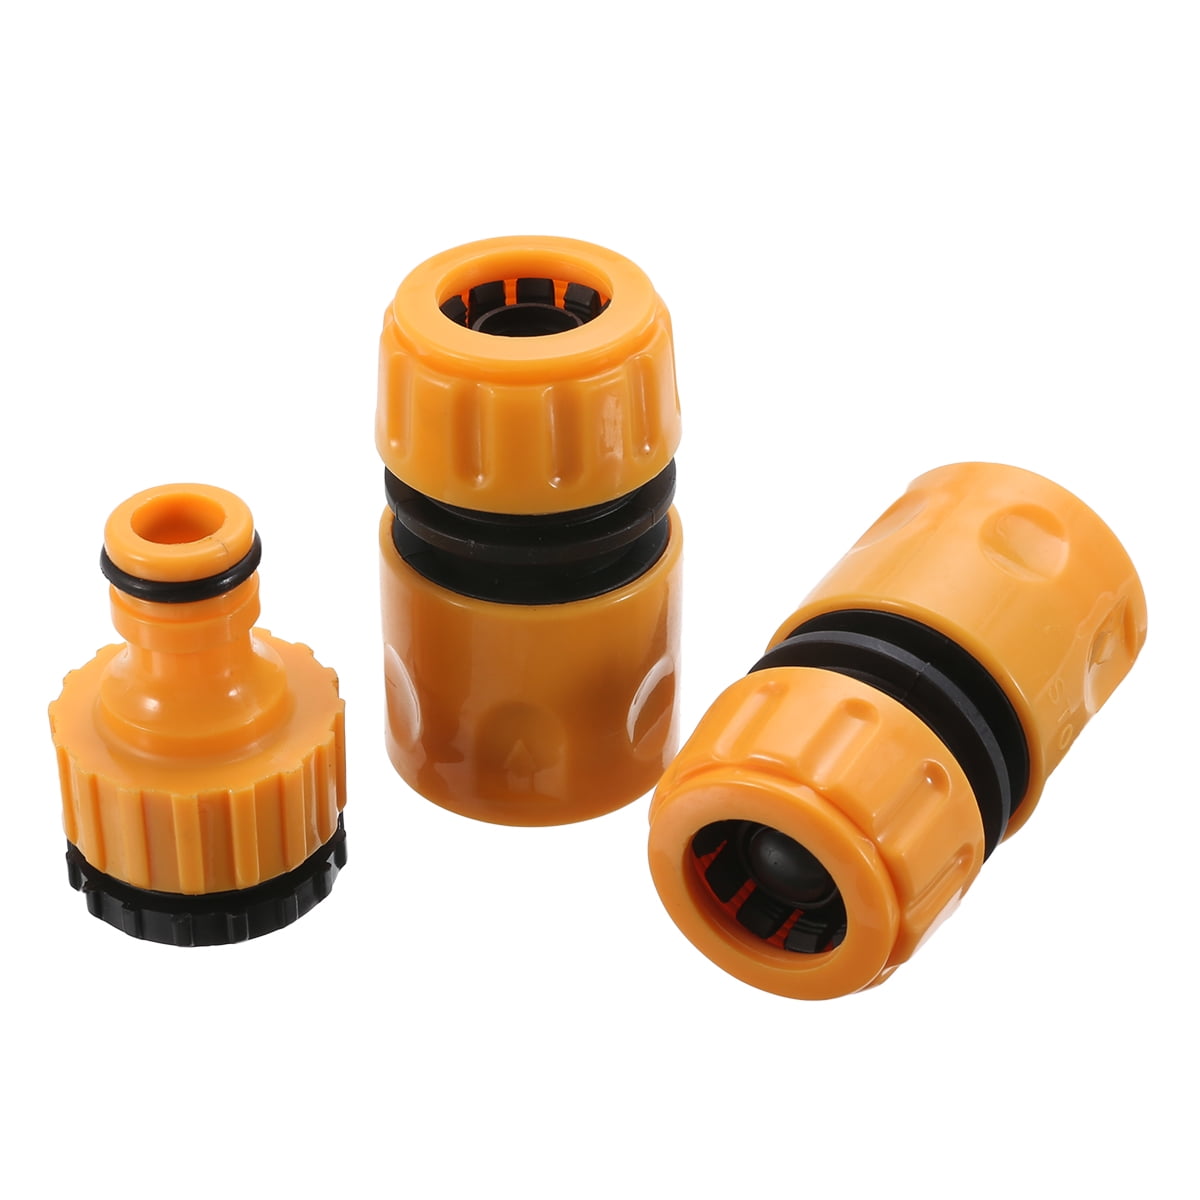 3PCS 1/2"3/4" Garden Hose Water Pipe Quick Connector Tube Fitting Tap Adapter 